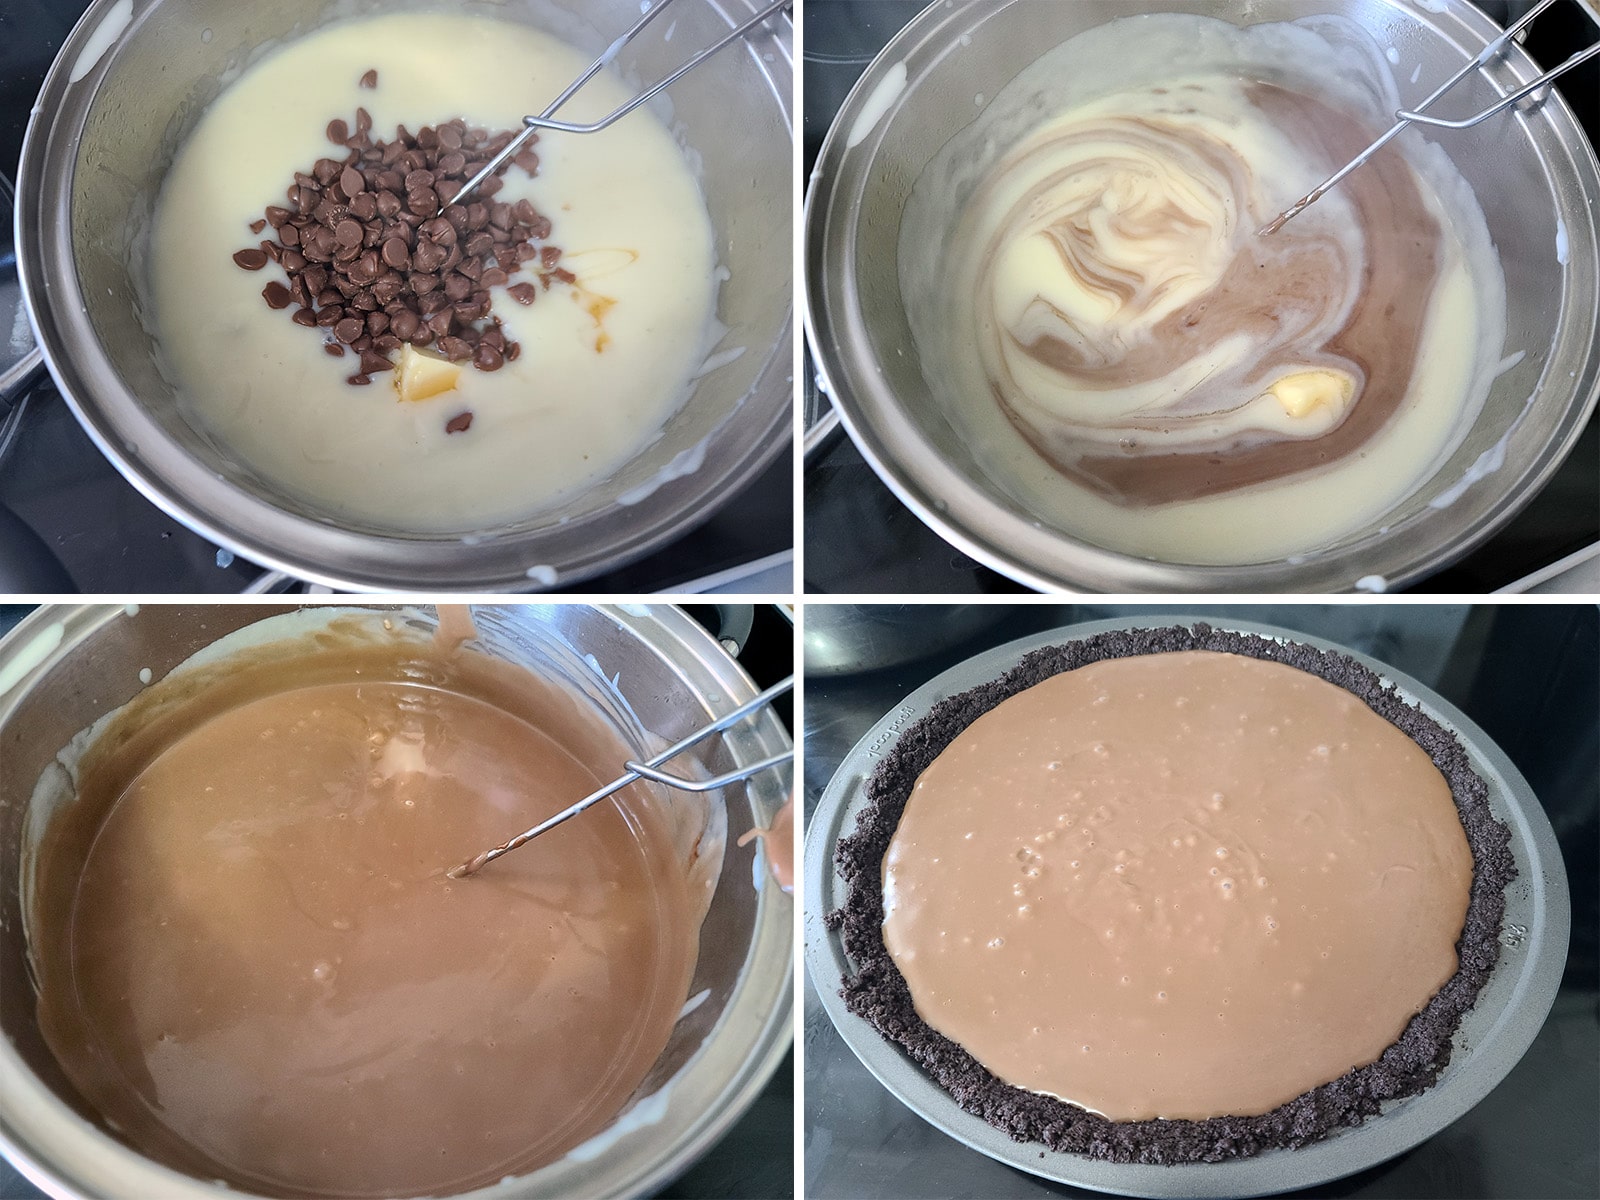 A 4 part image showing the chocolate being stirred into the no bake cream pie filling, and poured into the oreo cookie crust.